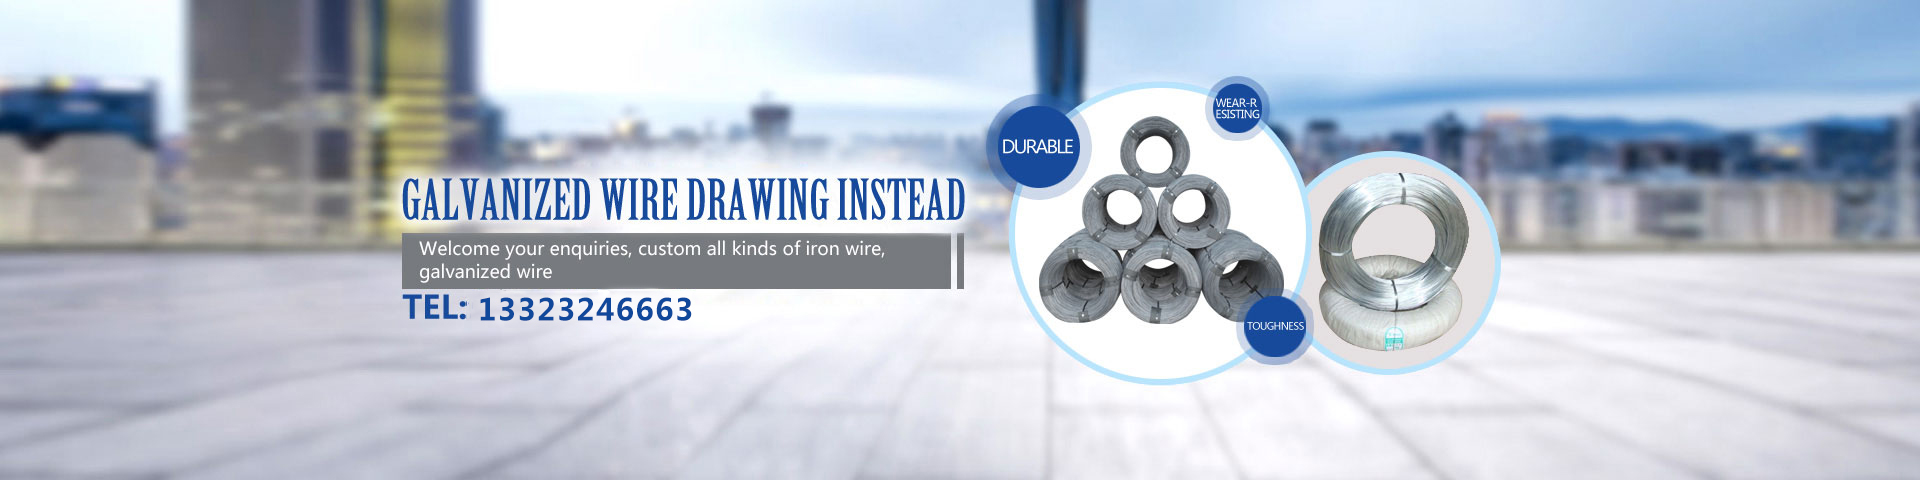 Galvanized wire drawing instead